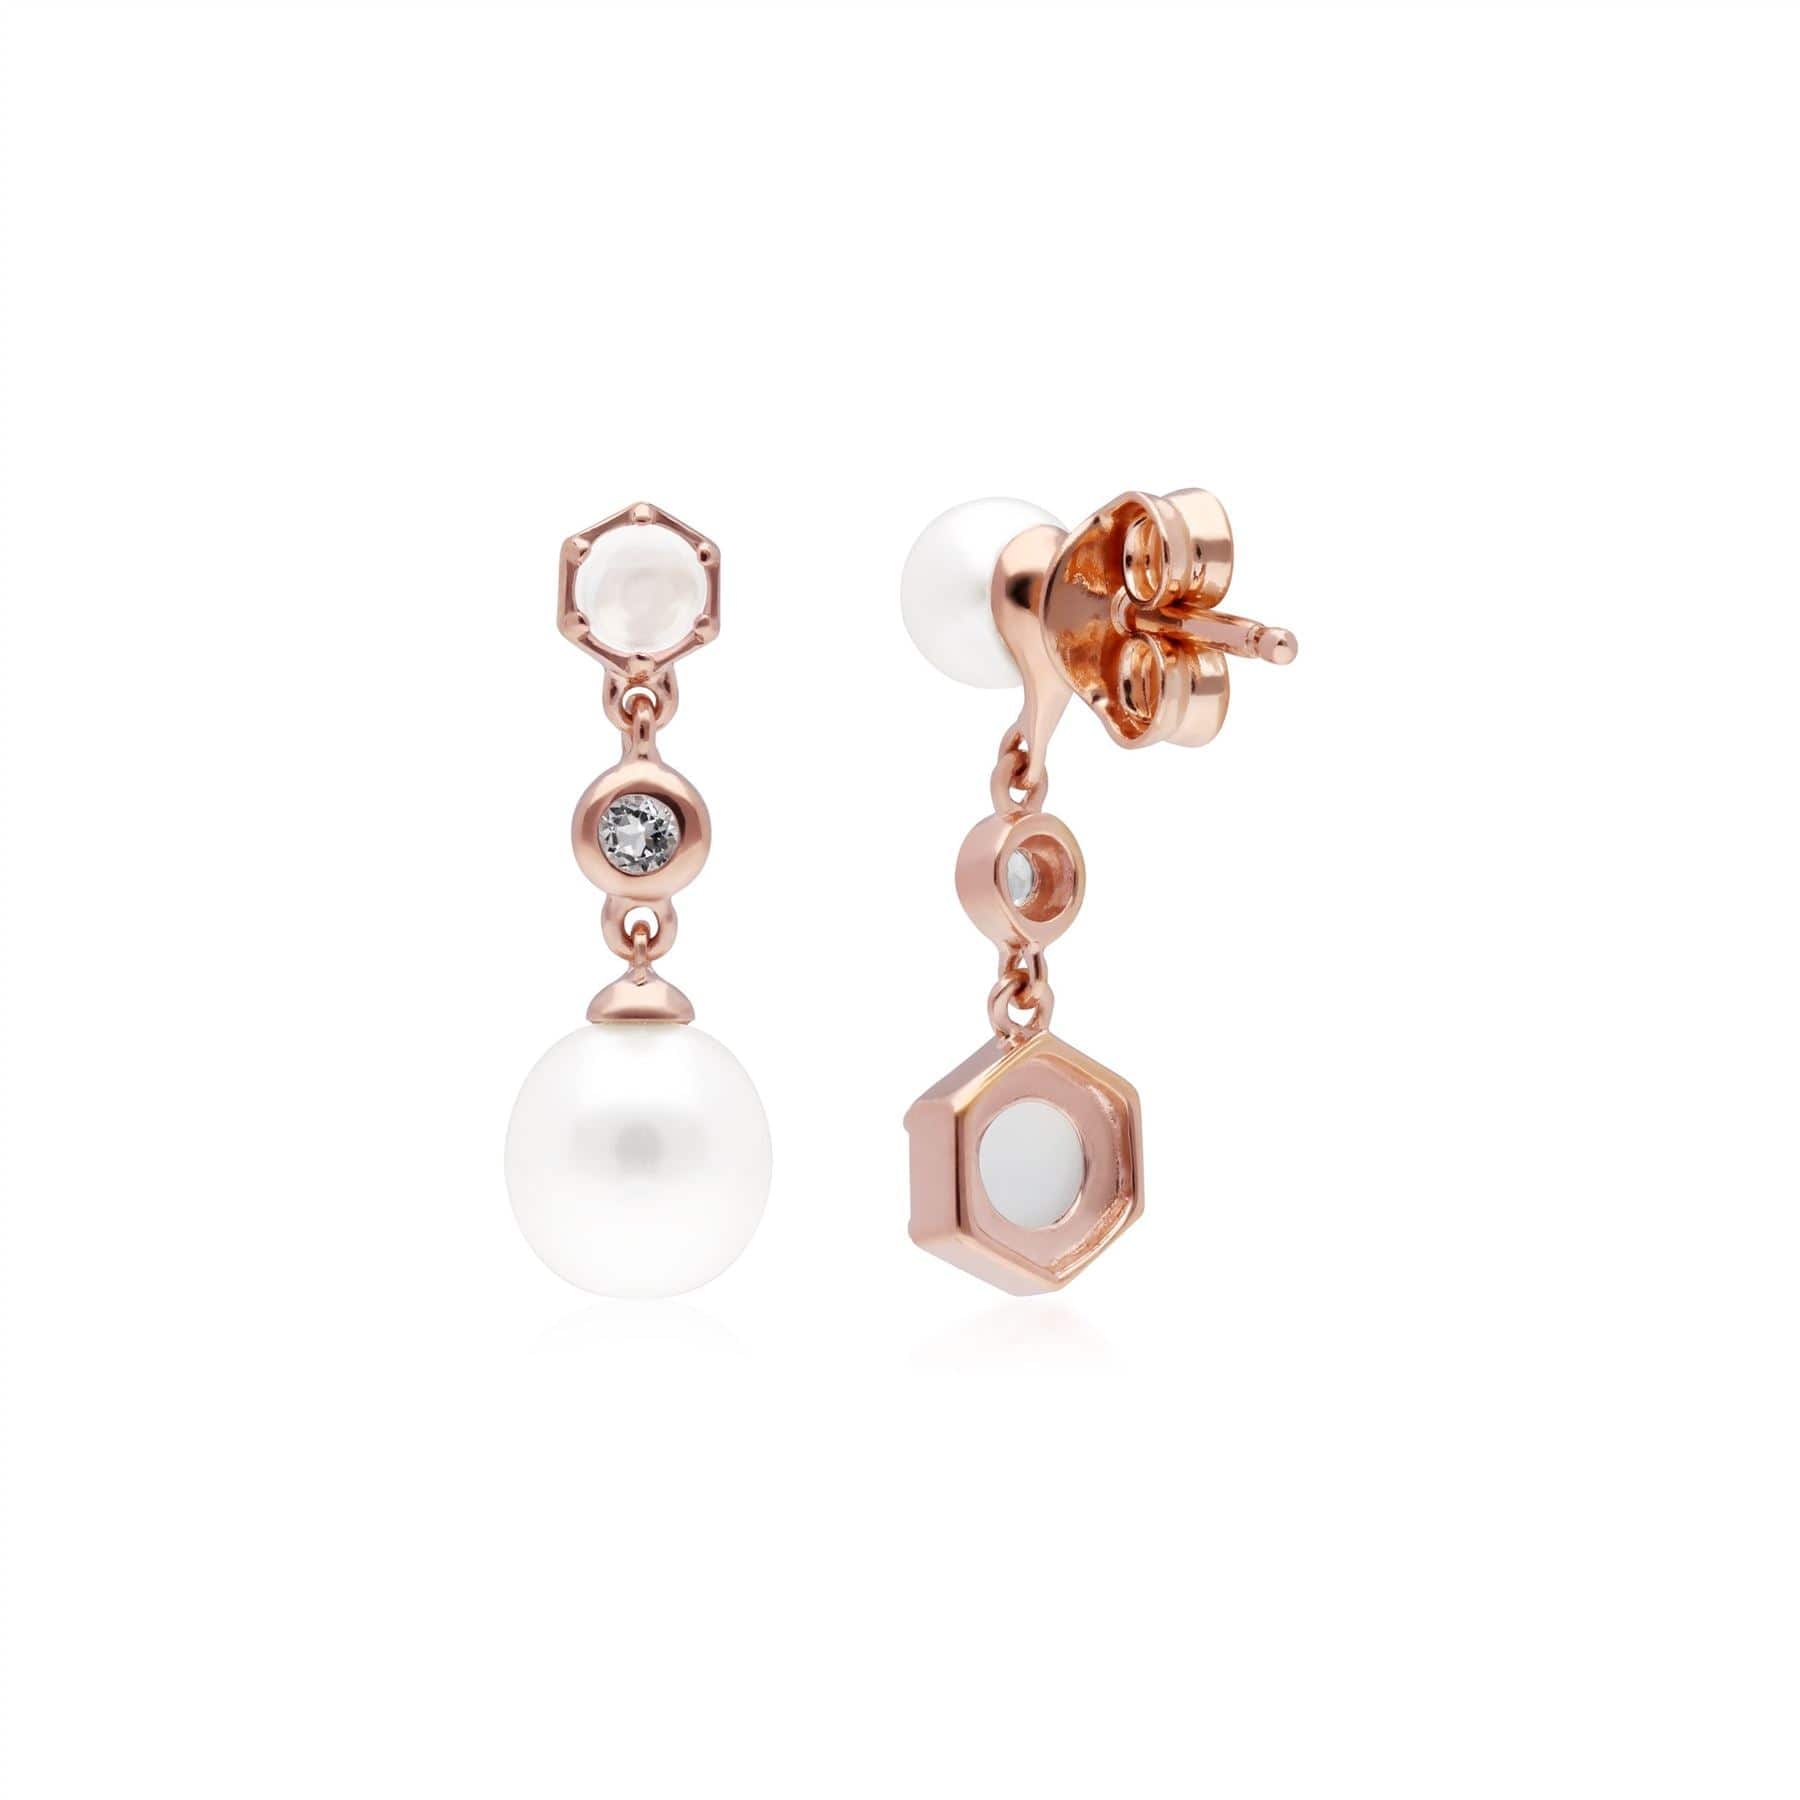 270E030902925 Modern Pearl, Moonstone & Topaz Mismatched Drop Earrings in Rose Gold Plated Silver 2